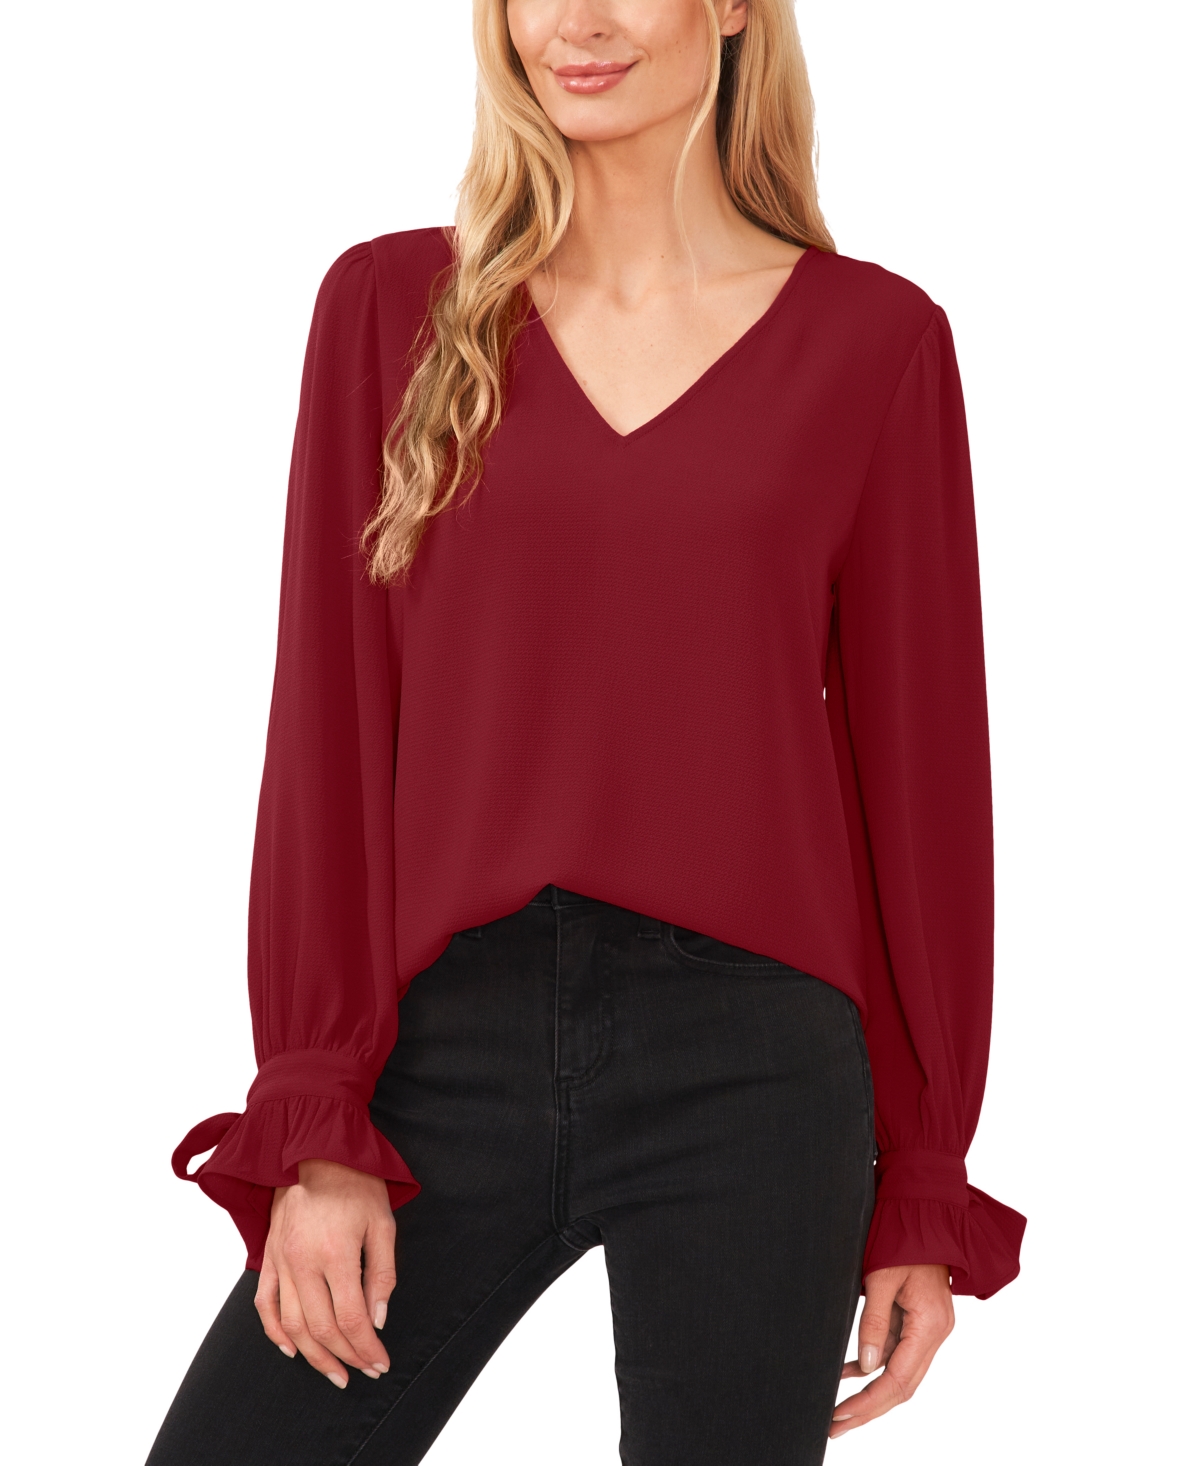 Women's Solid Long Sleeve V-Neck Tie Cuff Blouse - Wine